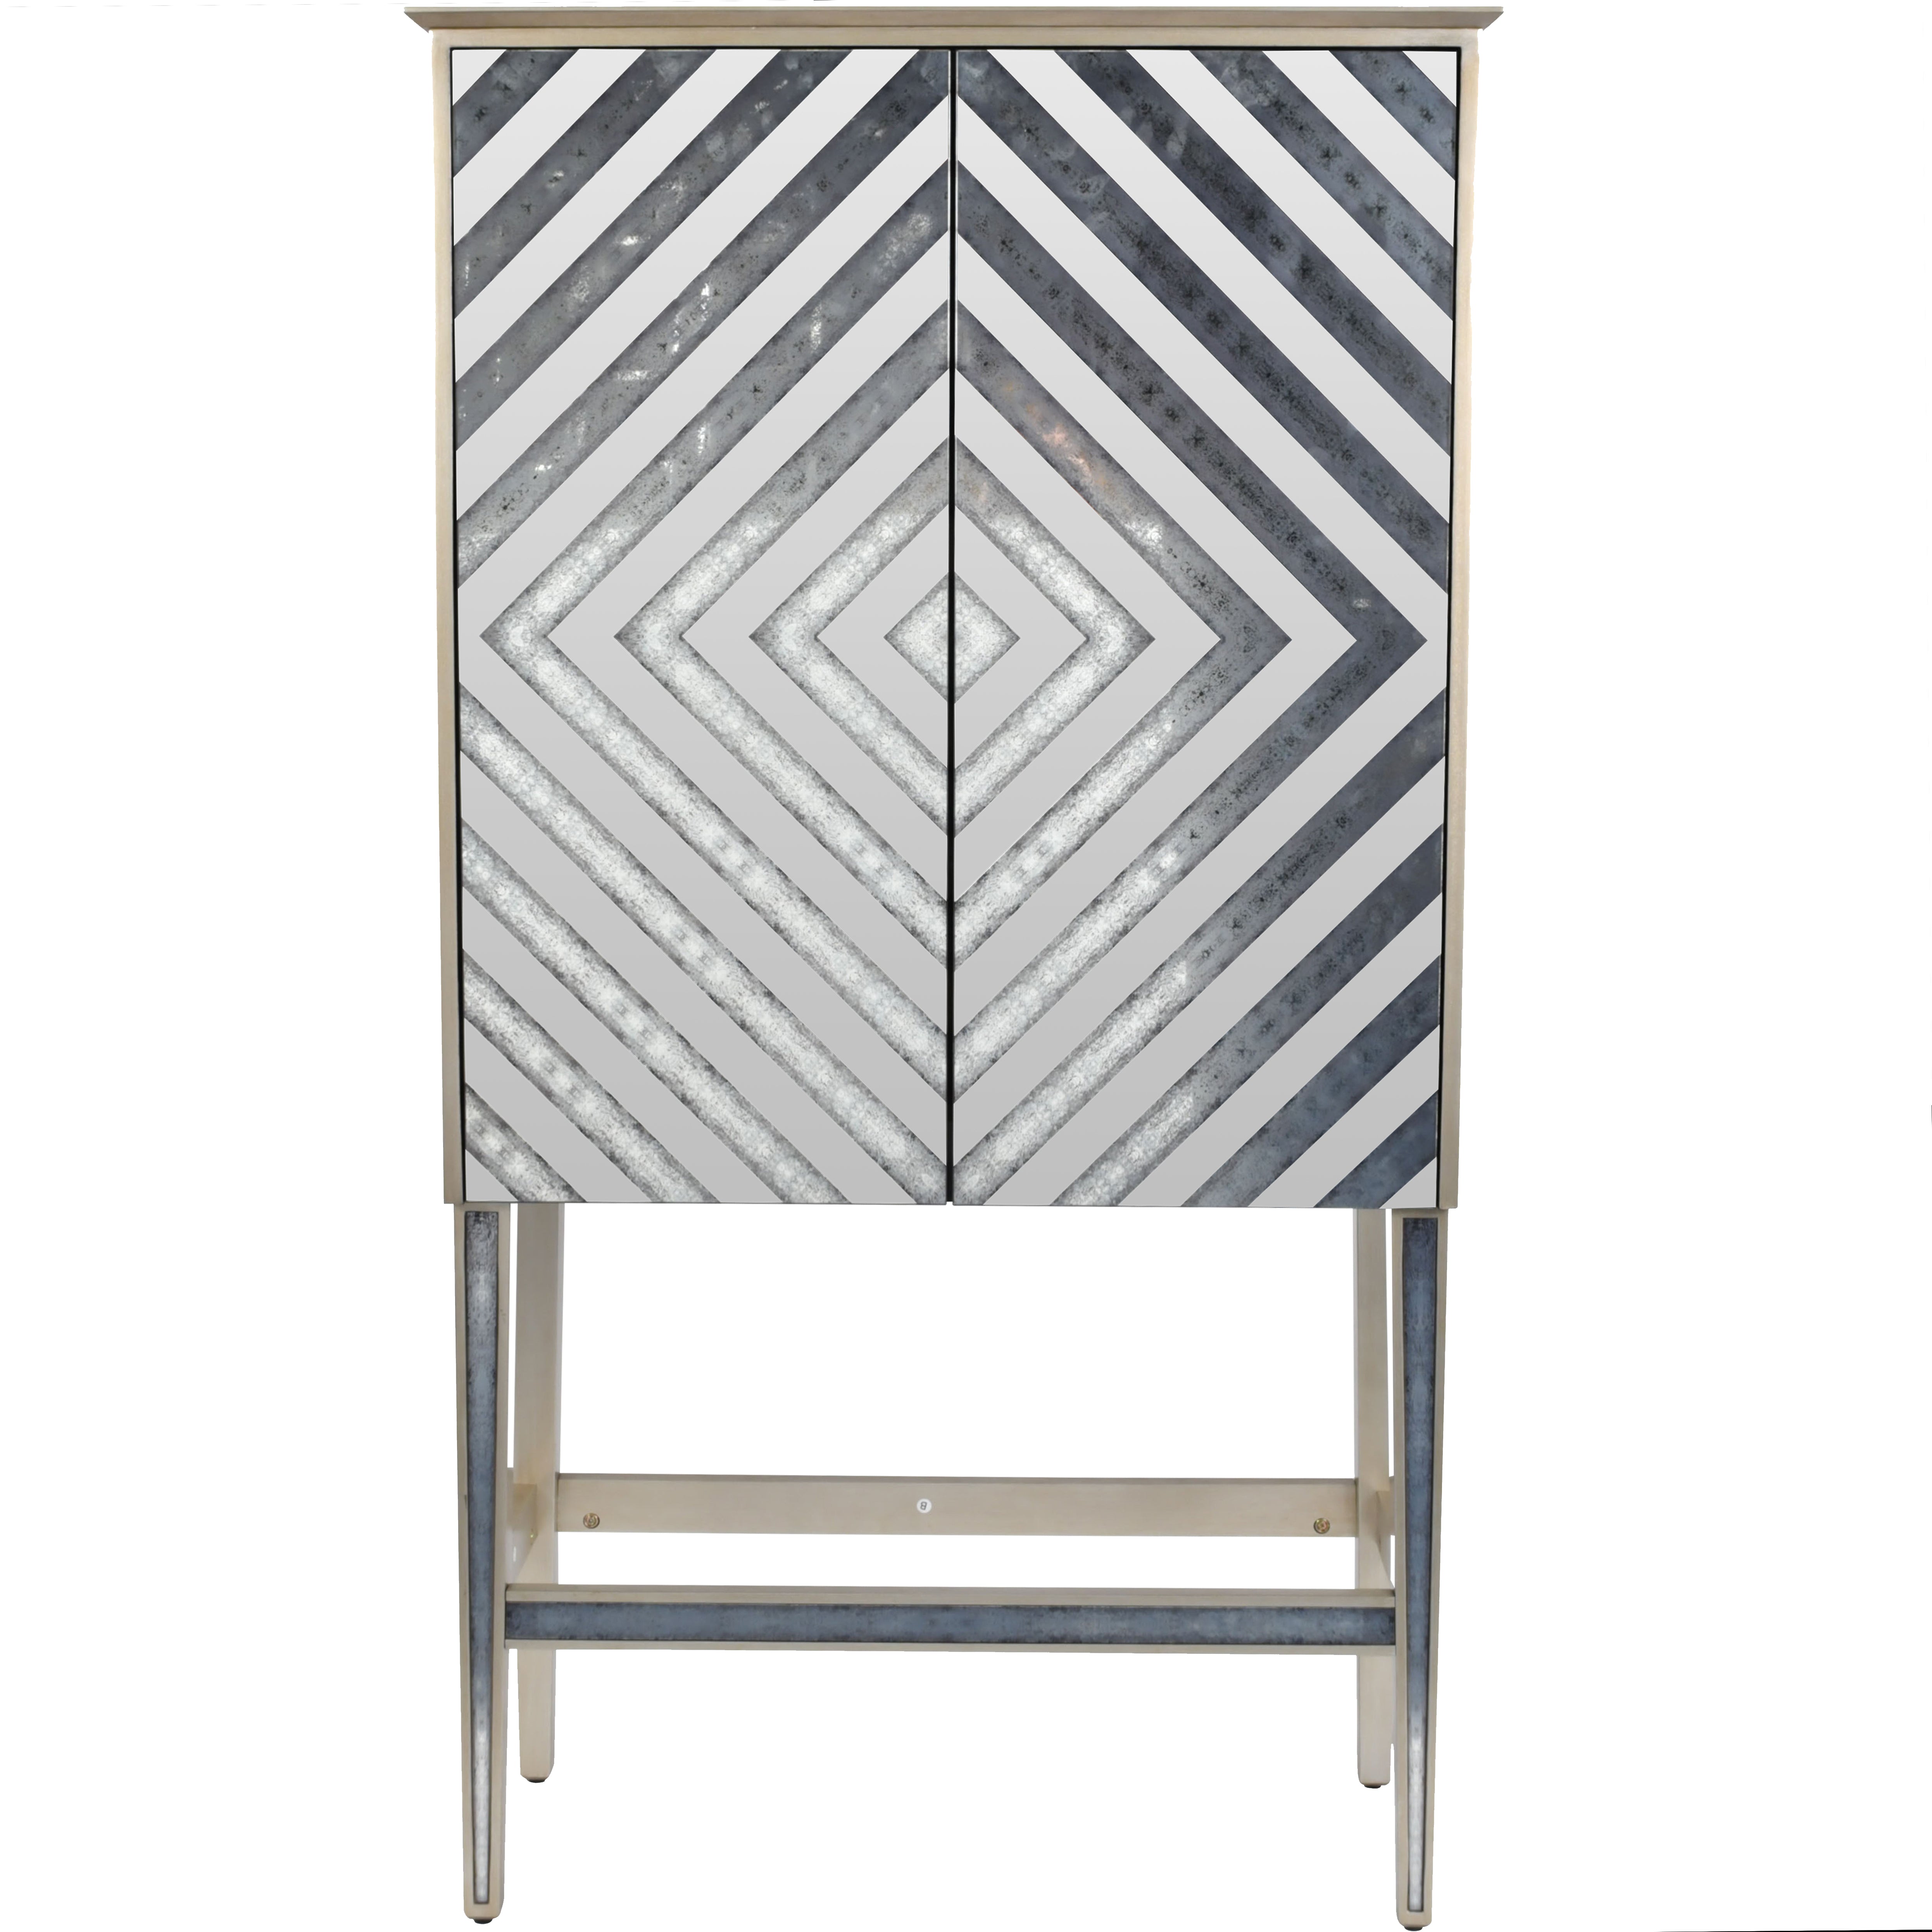 Lexis Antique Mirrored Bar Cabinet